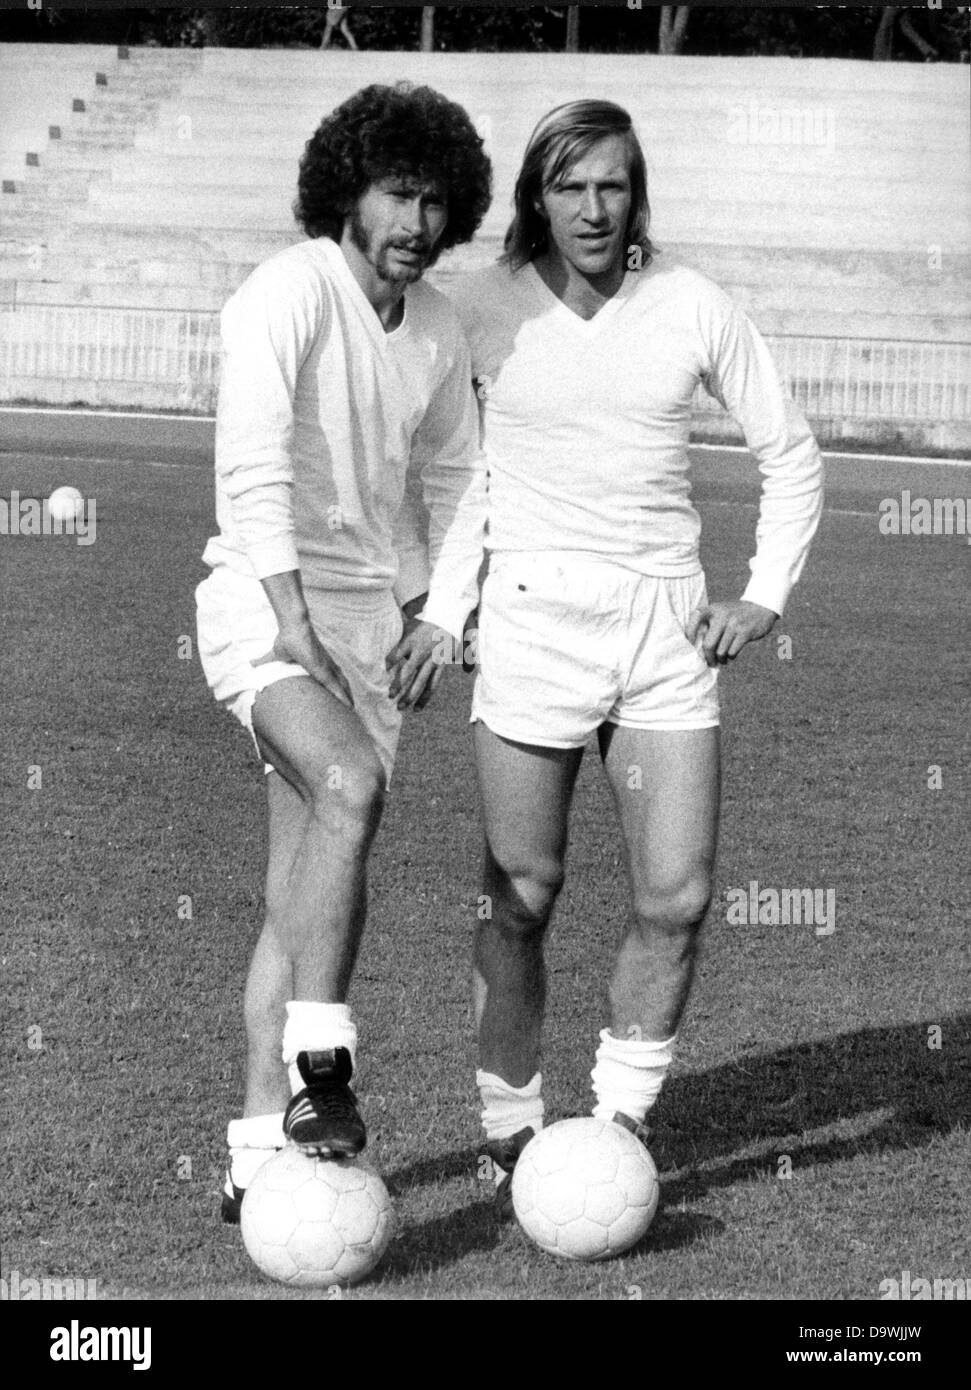 German players Paul Breitner (l) and Günter Netzer (r) play for Real Madrid, photographed on the 27th of August in 1974 in Madrid. Stock Photo